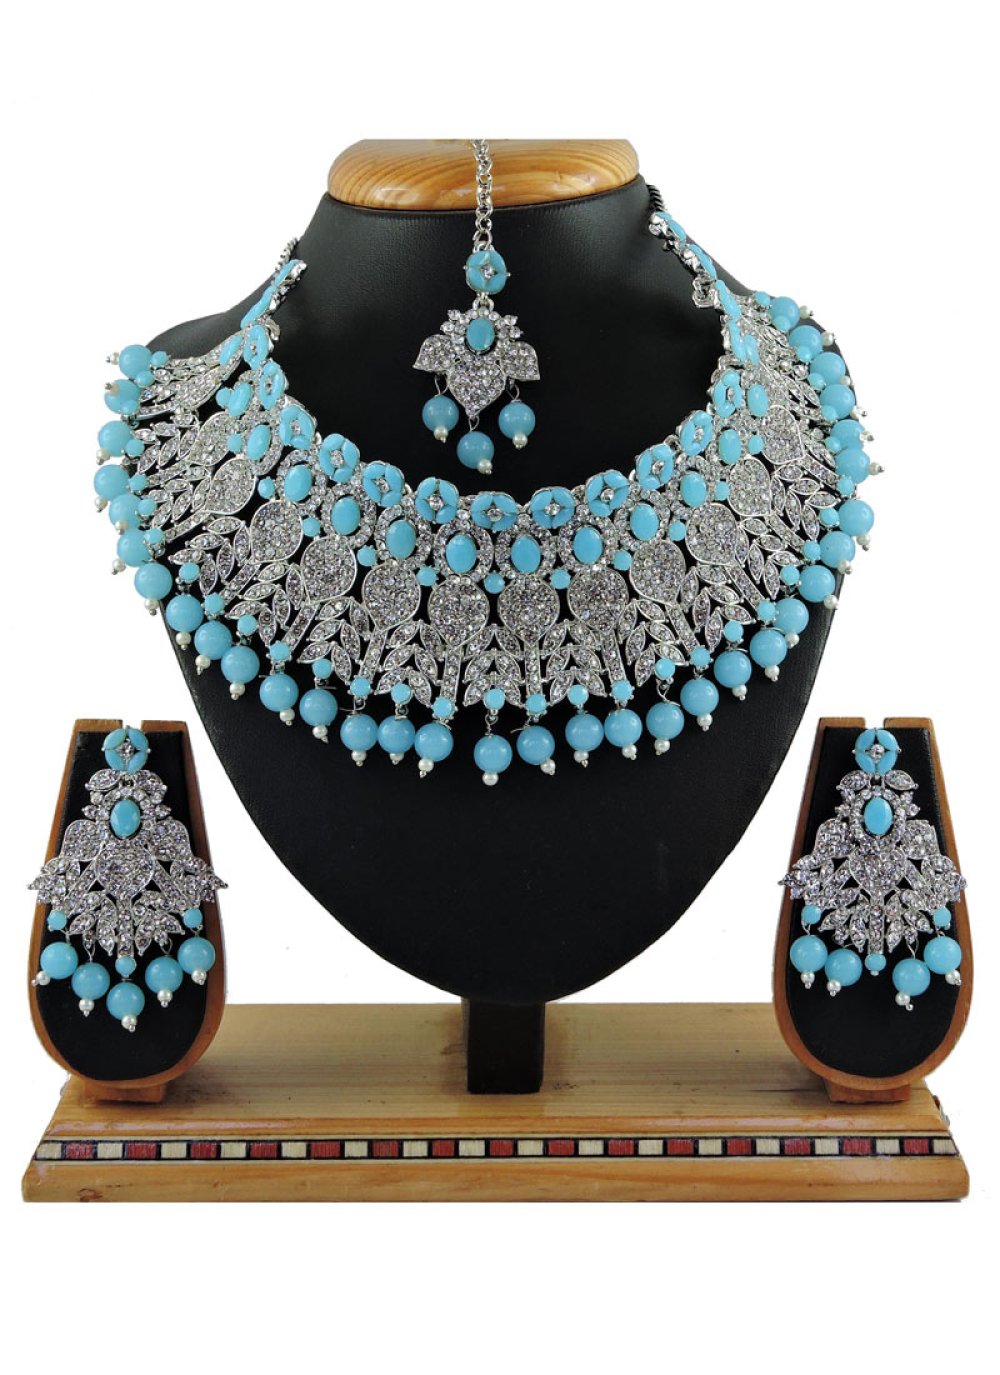 Royal Silver Rodium Polish Light Blue and Silver Color Beads Work Necklace Set